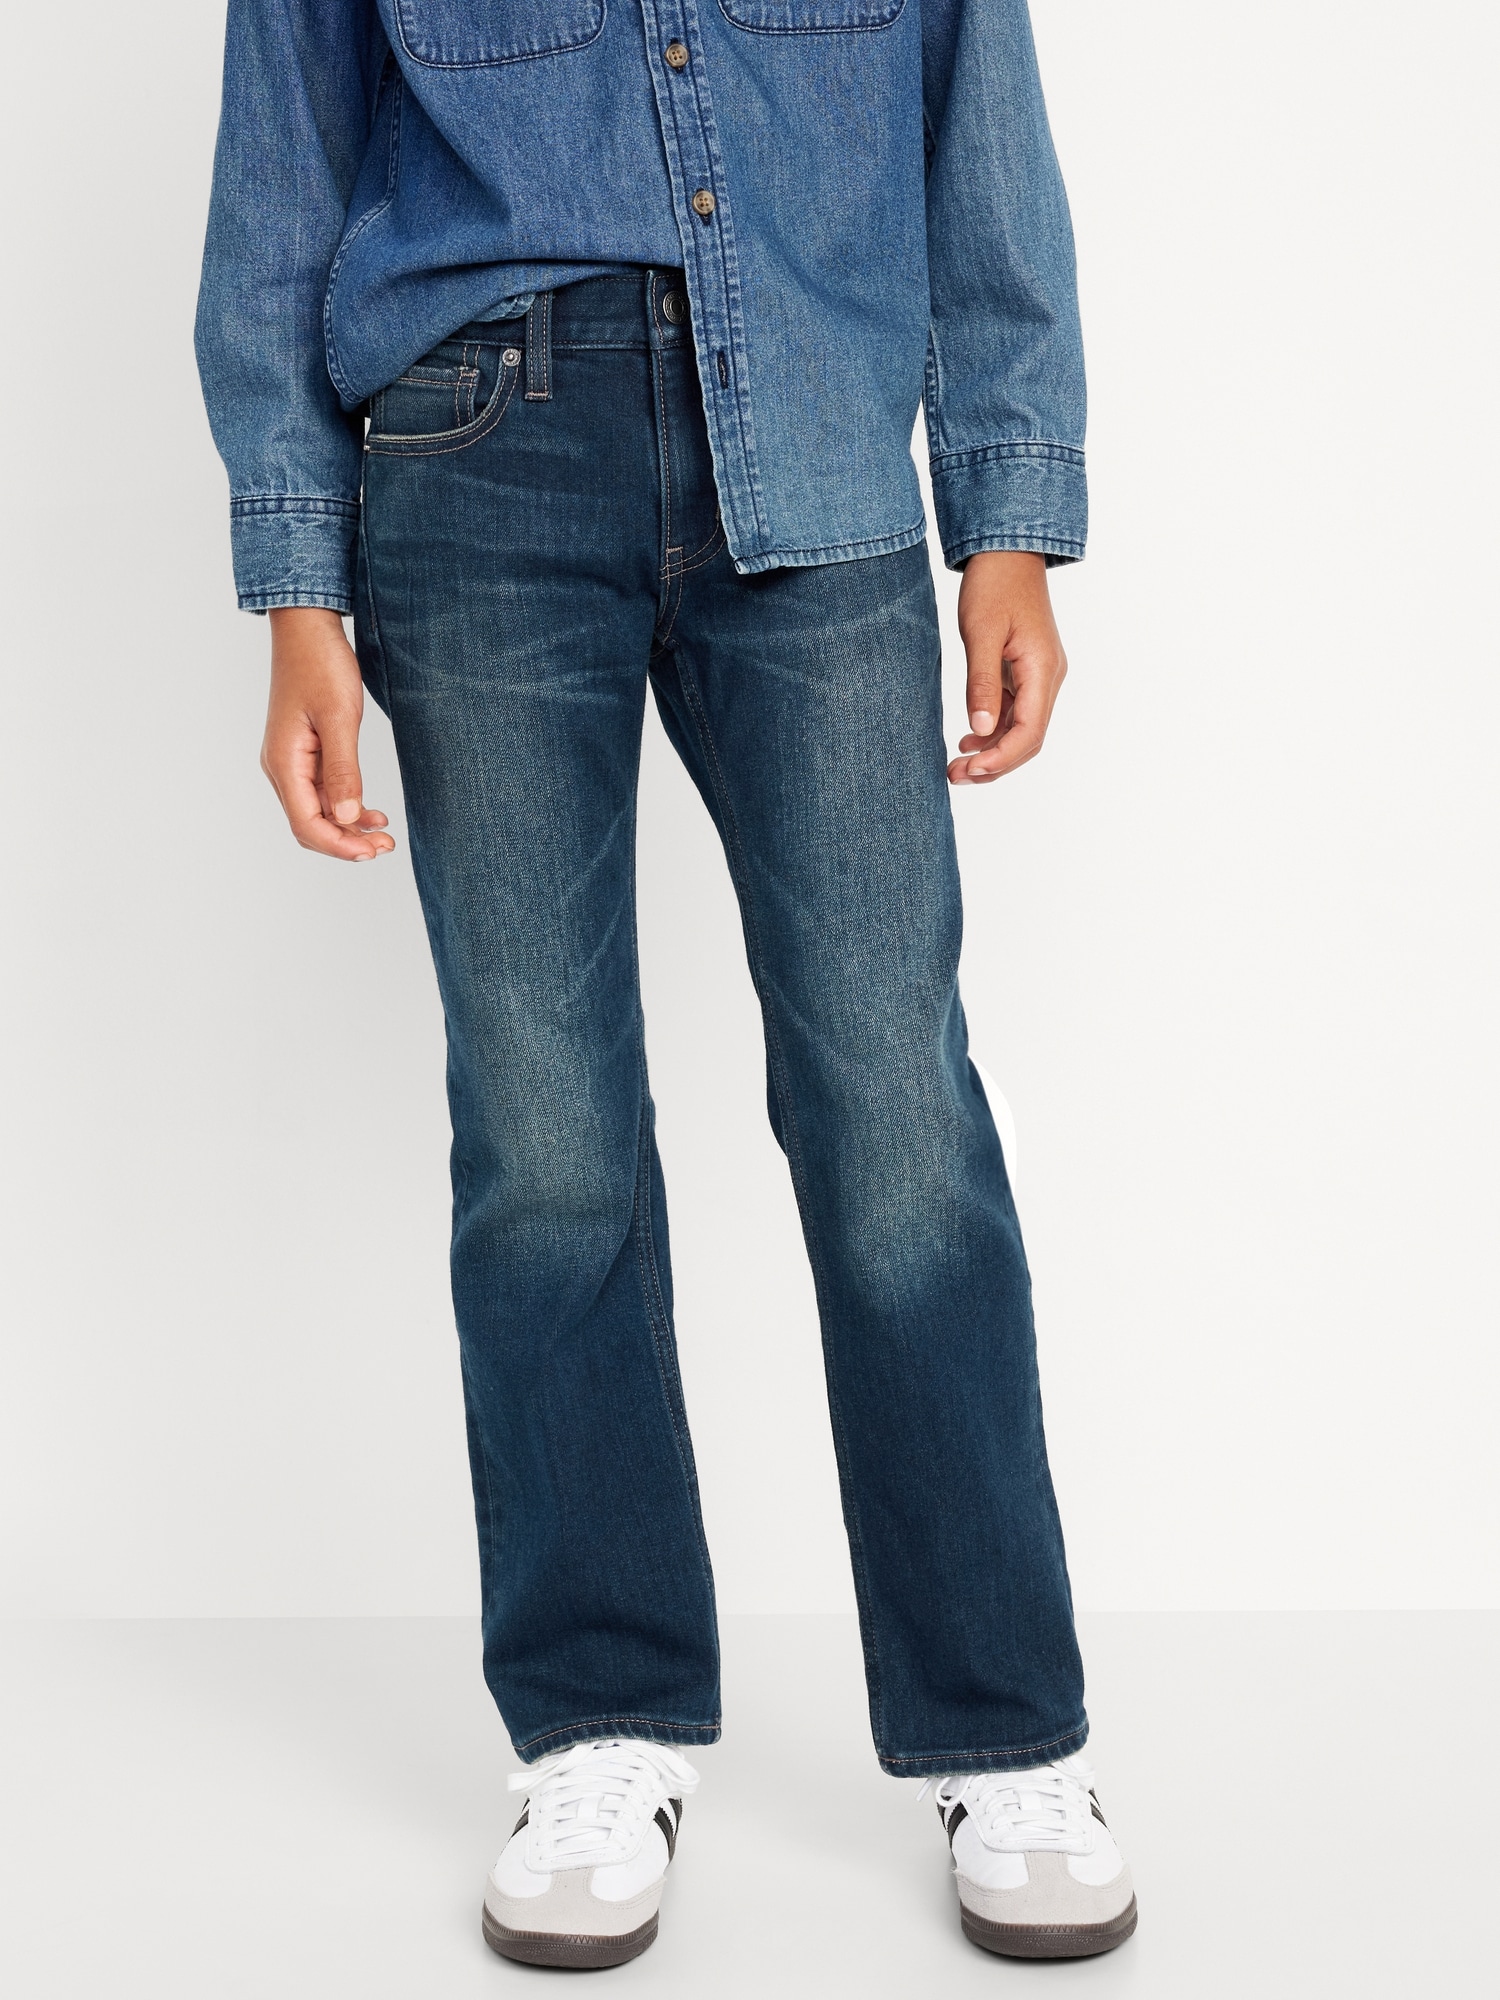 Built-In Warm Straight Jeans for Boys